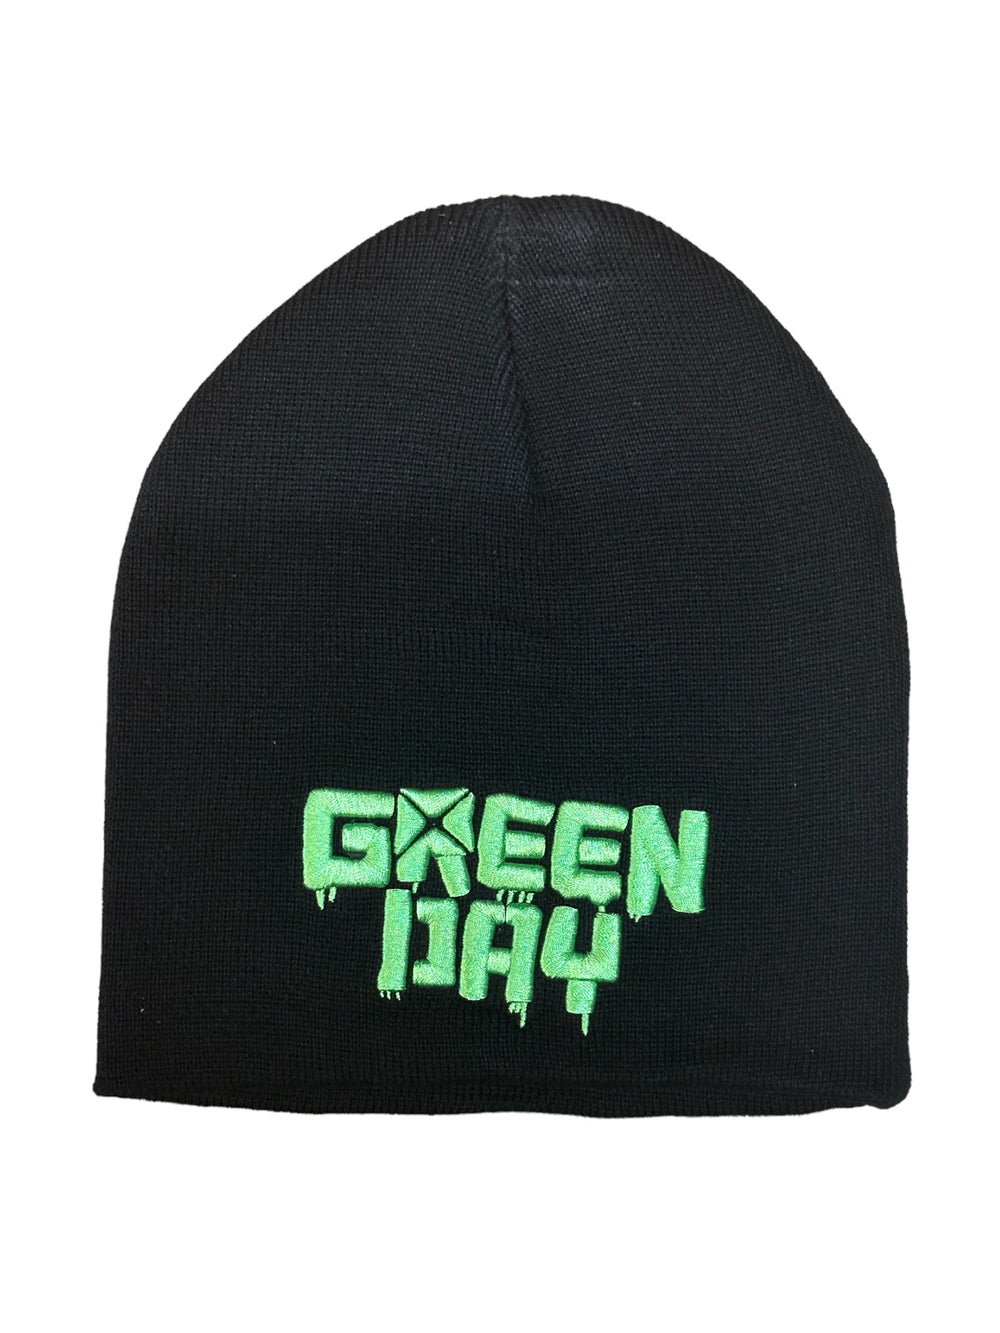 Green Day - Logo Official Beanie Hat One Size Fits All NEW